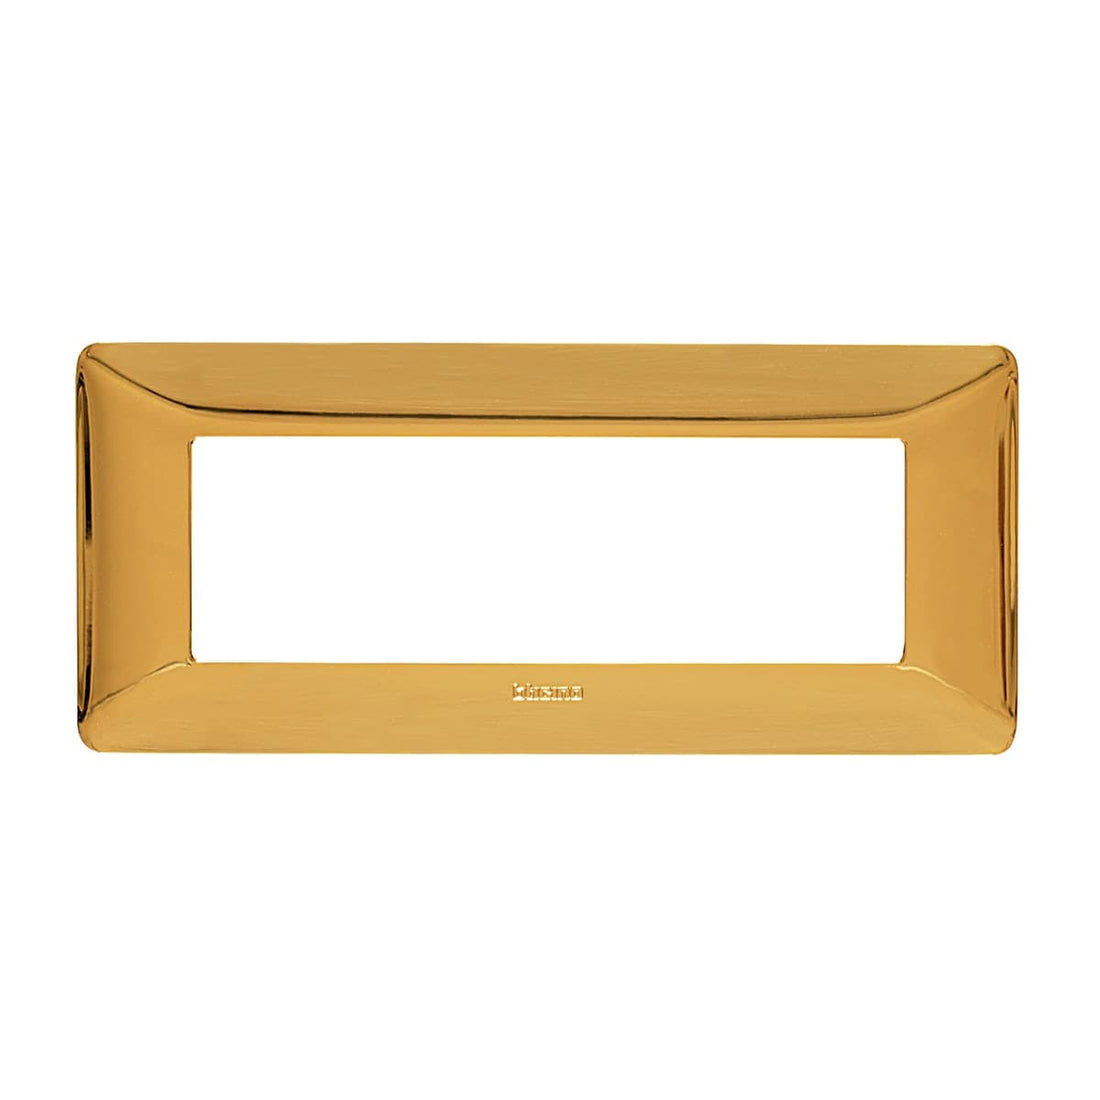 MATIX PLATE 6 PLACES POLISHED GOLD - best price from Maltashopper.com BR420100844